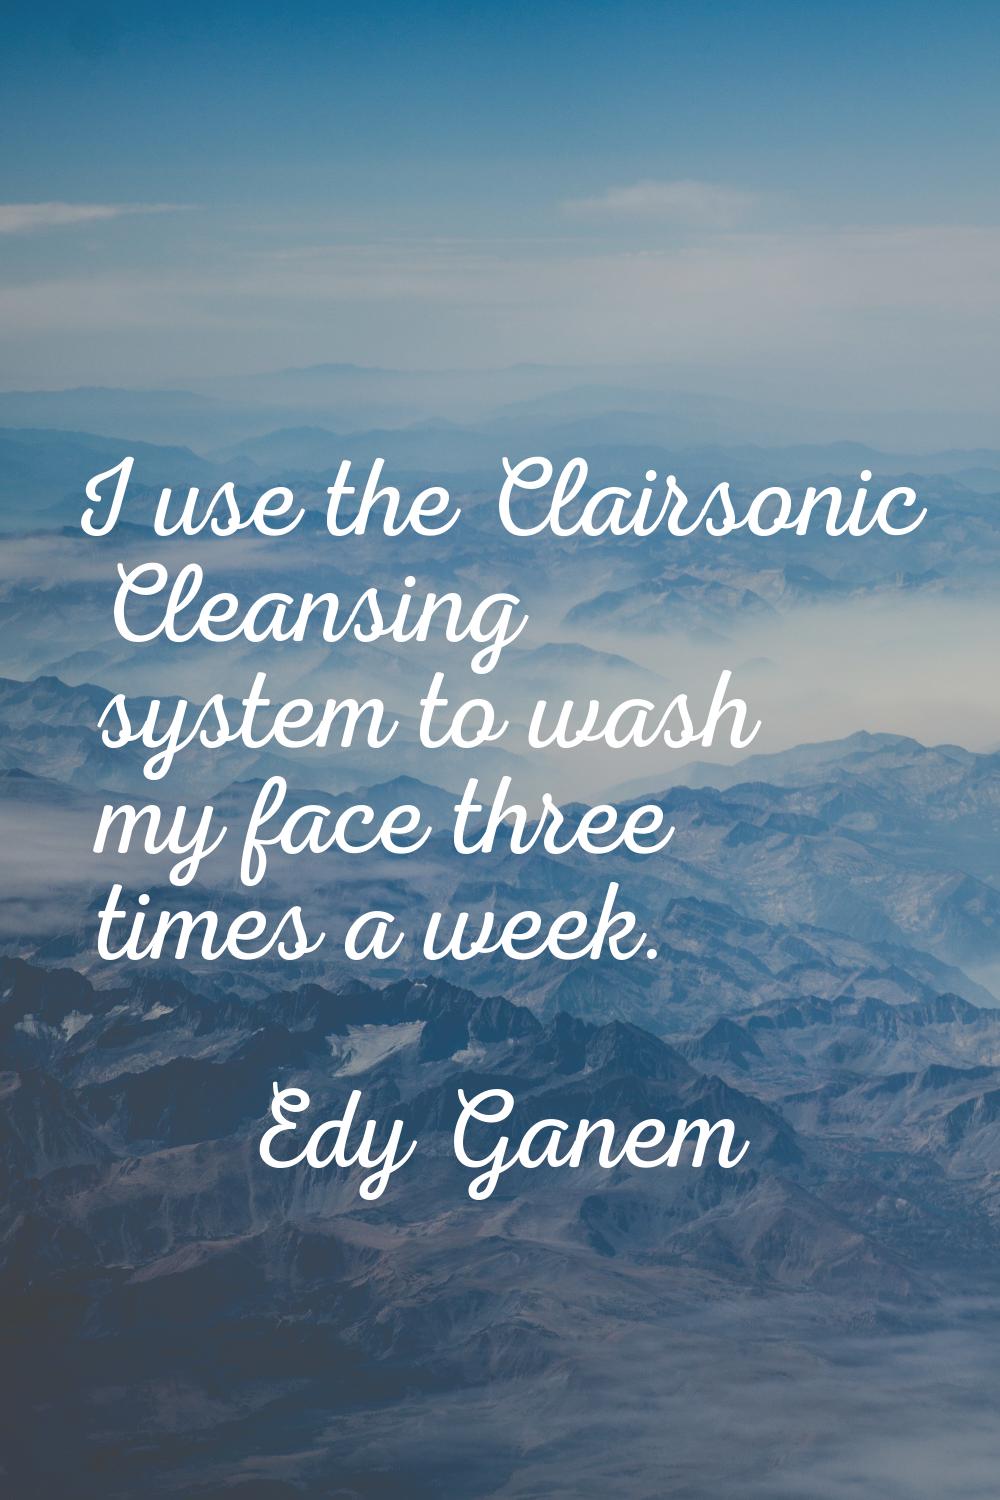 I use the Clairsonic Cleansing system to wash my face three times a week.